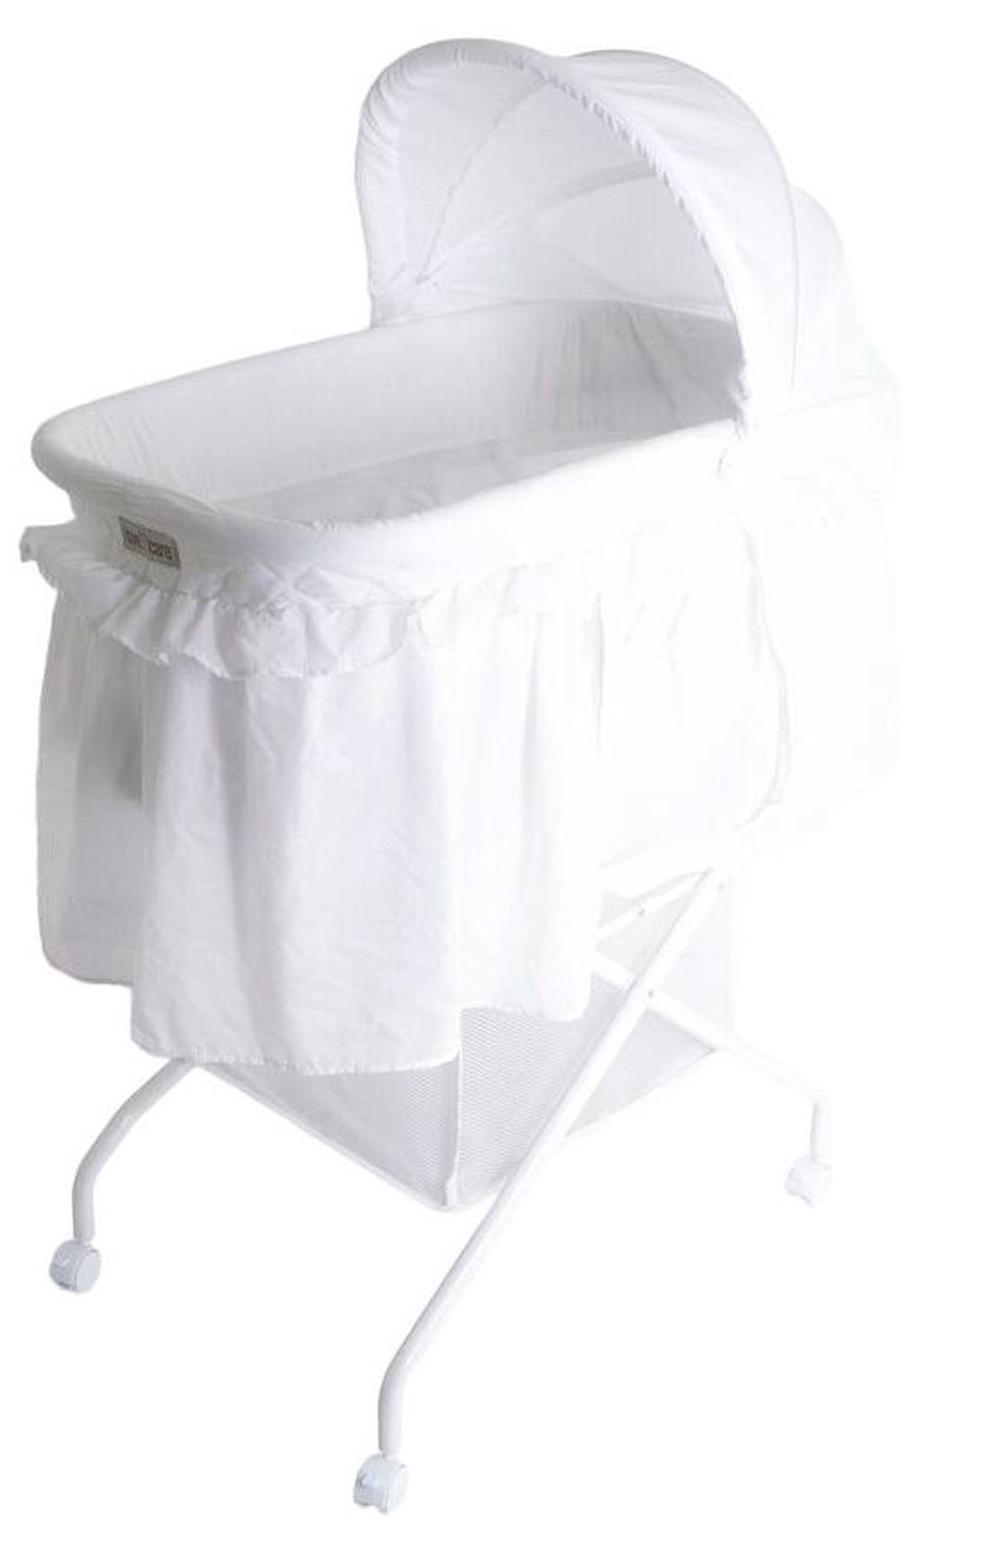 valco baby sonno bassinet review